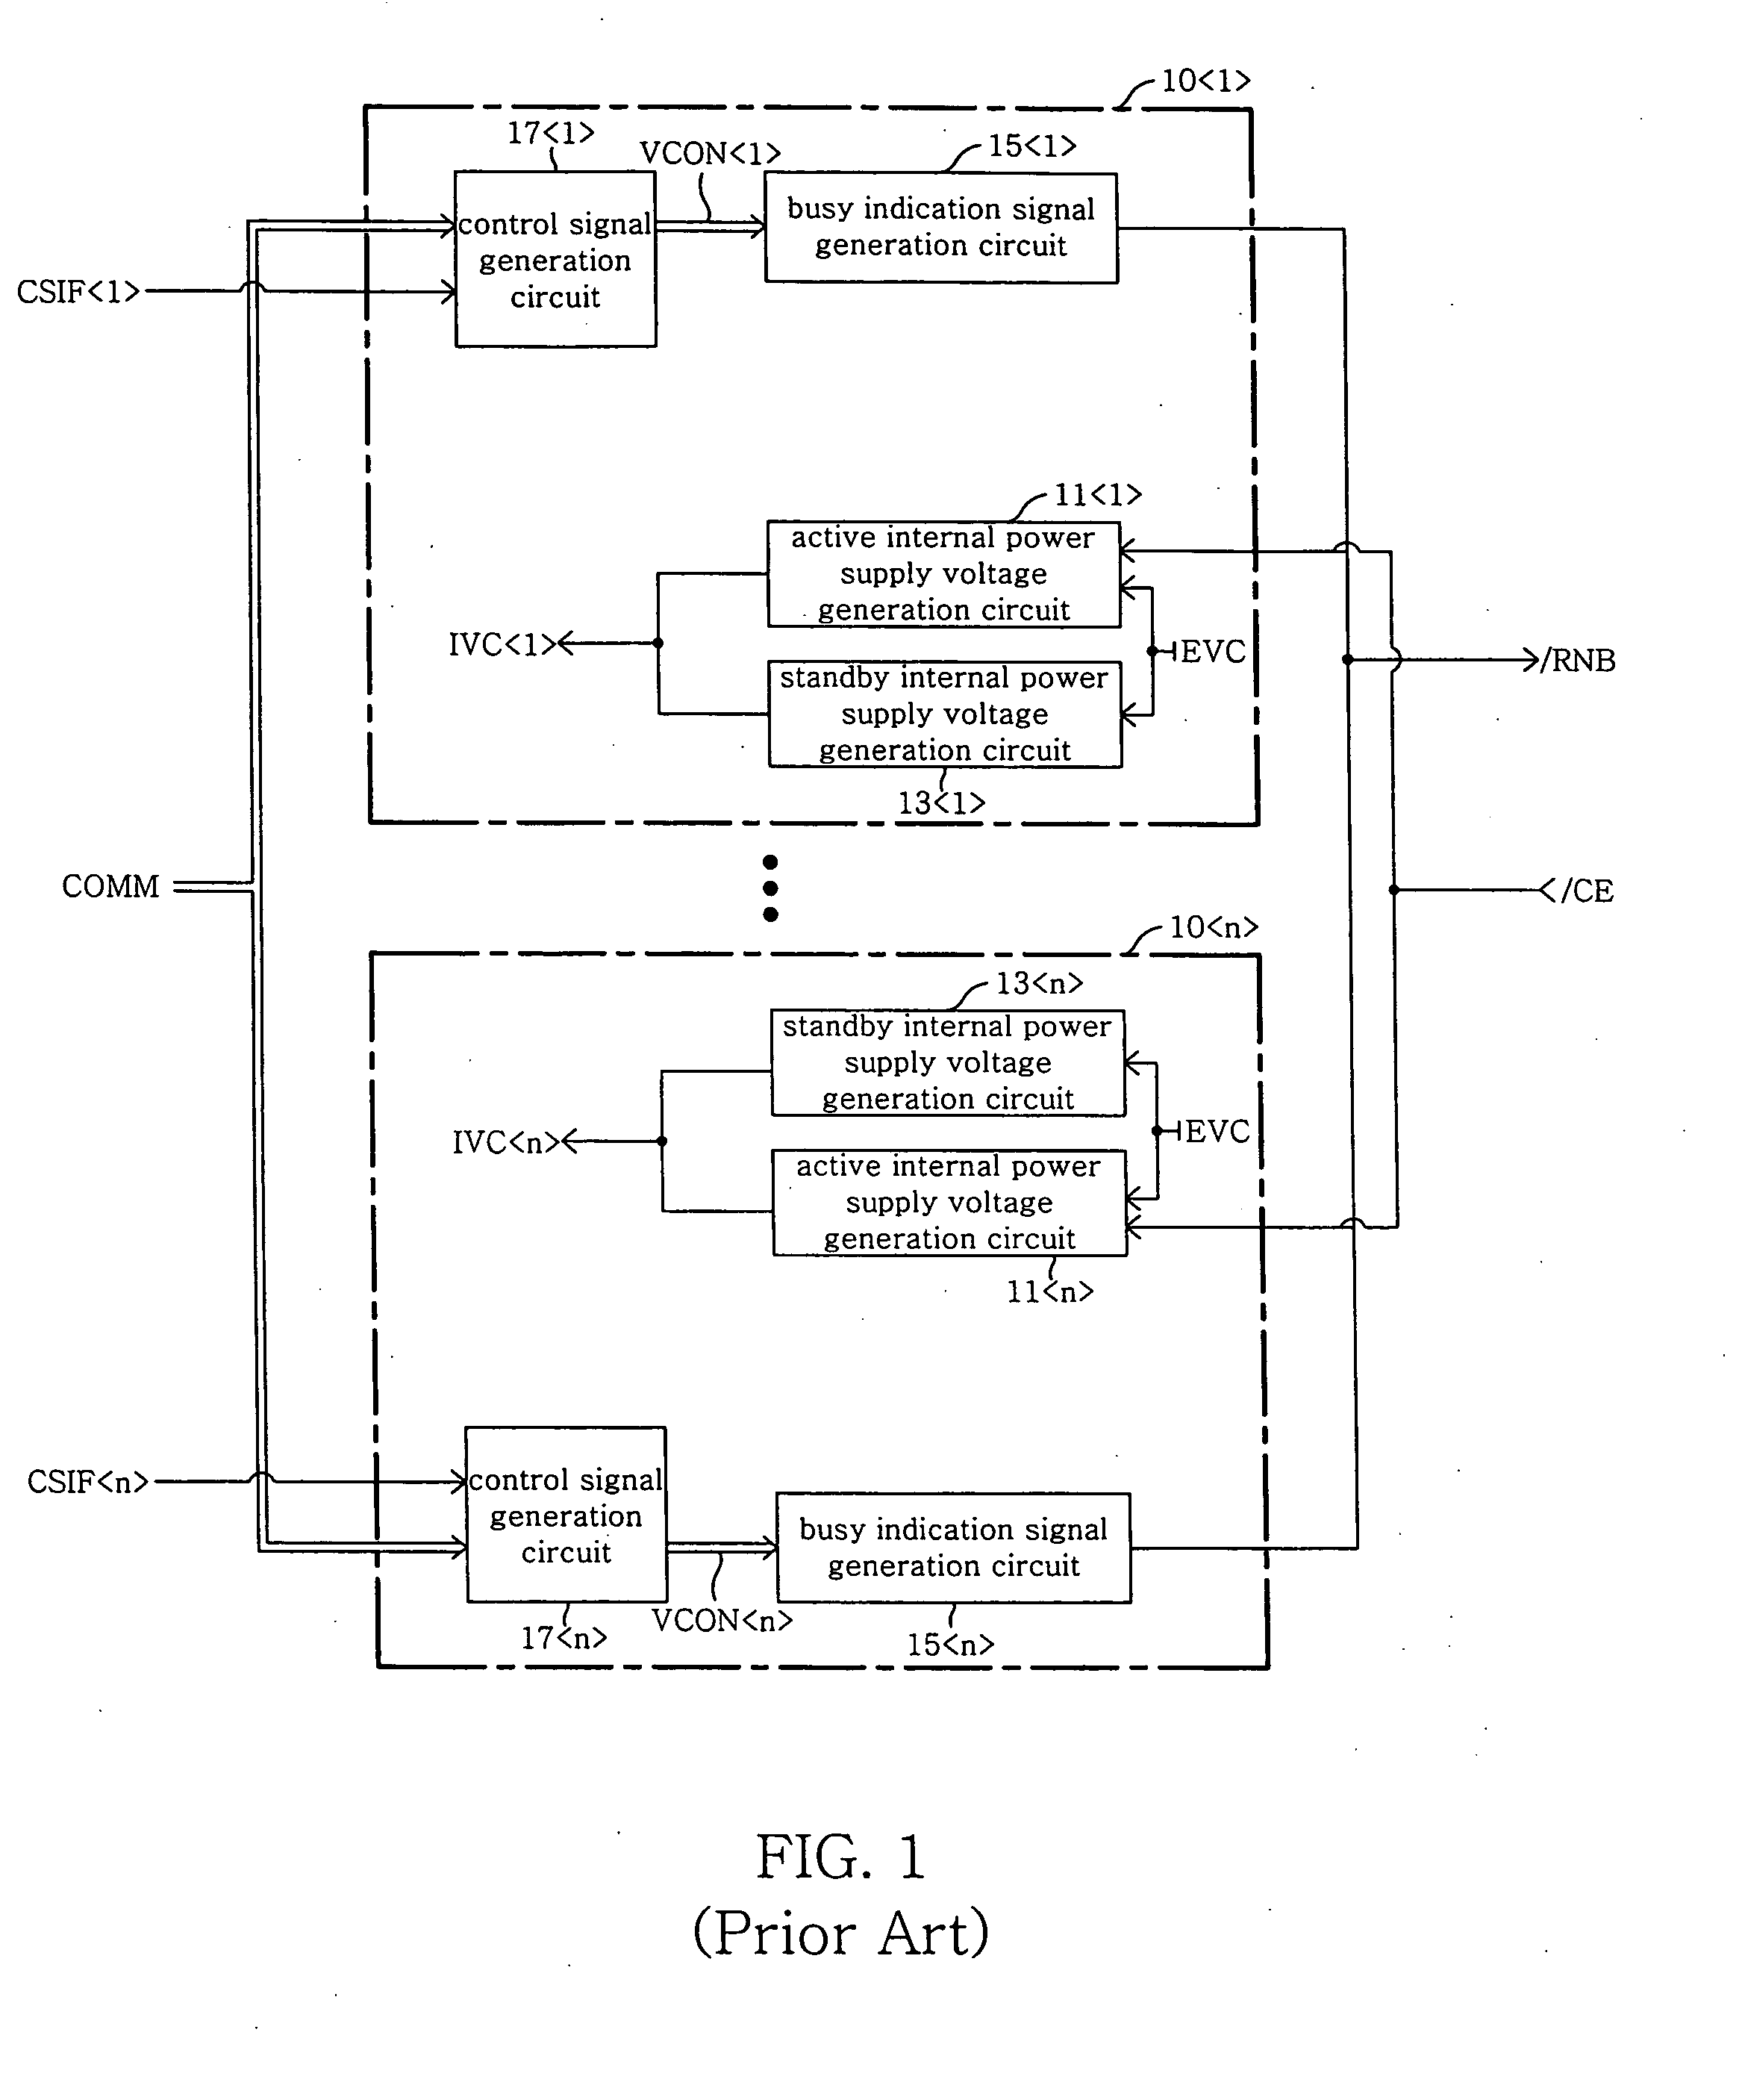 Multi-chip semiconductor memory device having internal power supply voltage generation circuit for decreasing current consumption